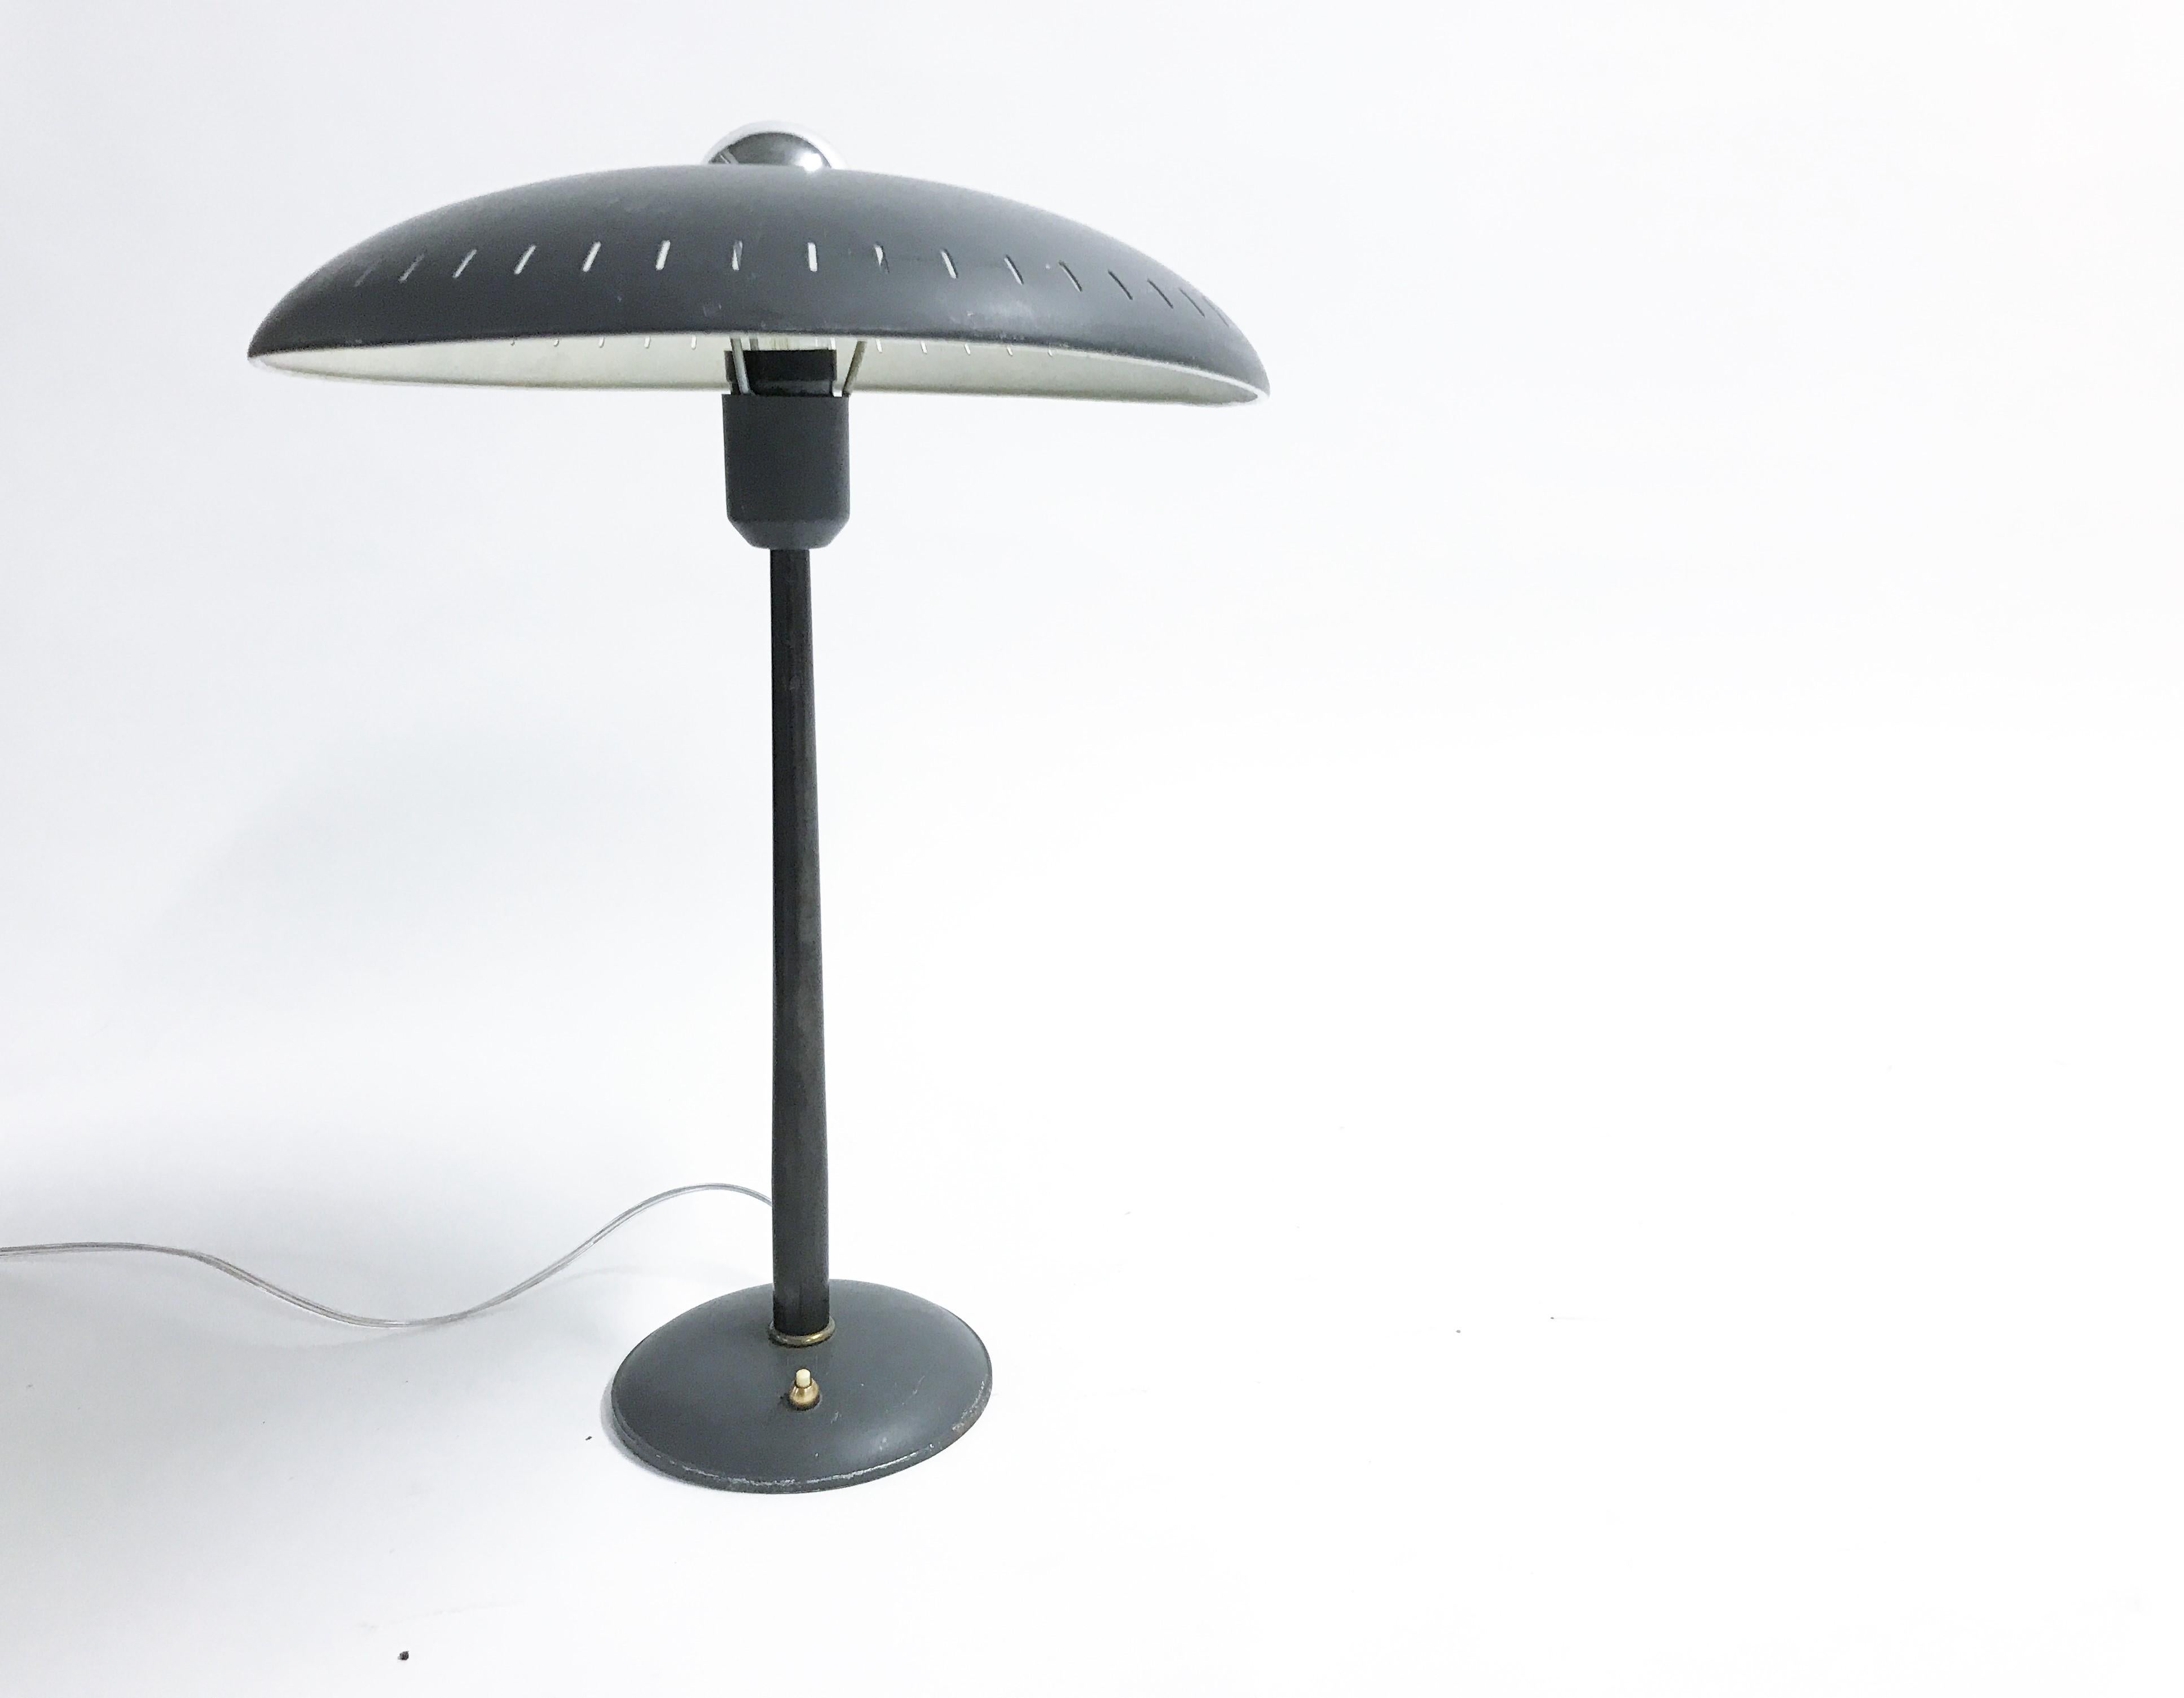 Midcentury table lamp designed by Louis Kalff for Philips.

The lamp consists of a round cast iron base with a black steel rod and a enamelled perforated aluminum lamp shade.

The lamp shade has a 'ufo' design, typical for the space age era and